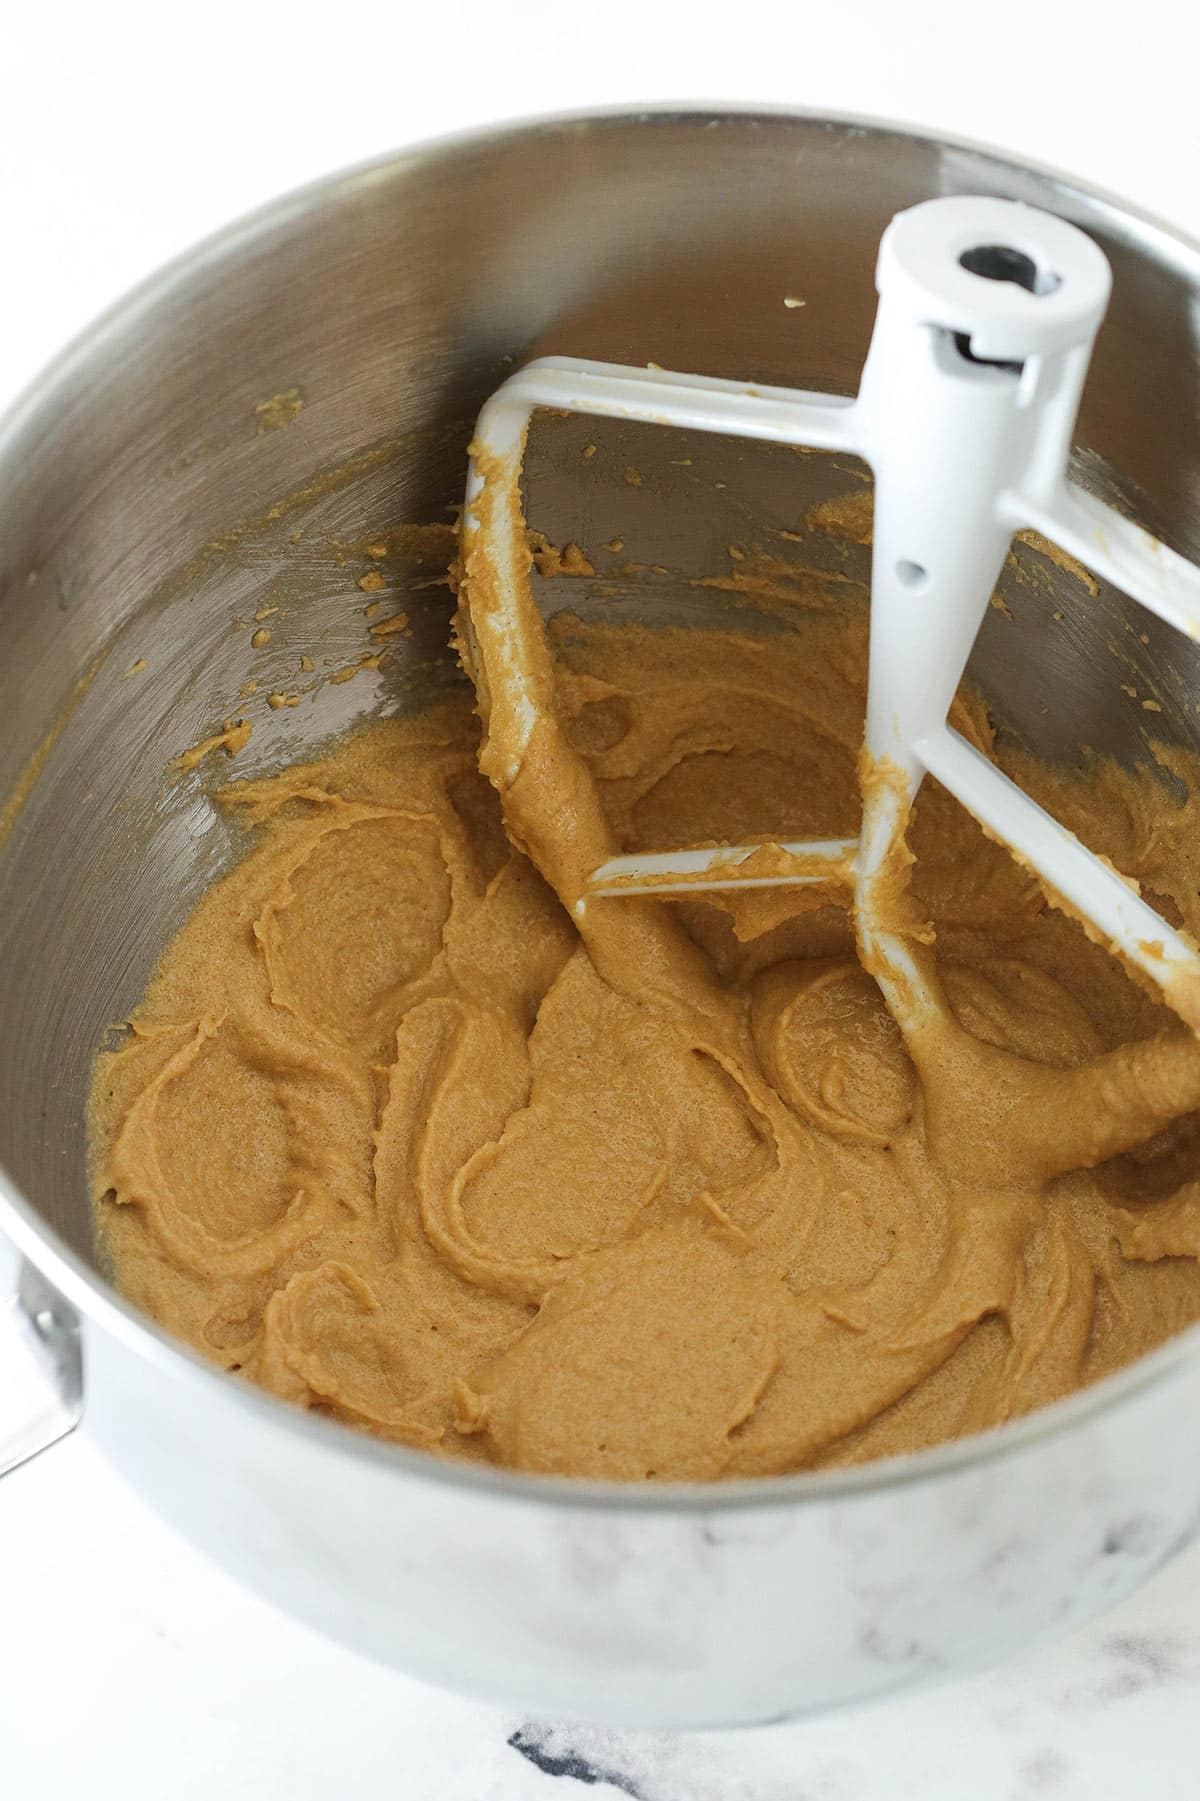 Creaming together butter, peanut butter, sugar and brown sugar in a mixing bowl